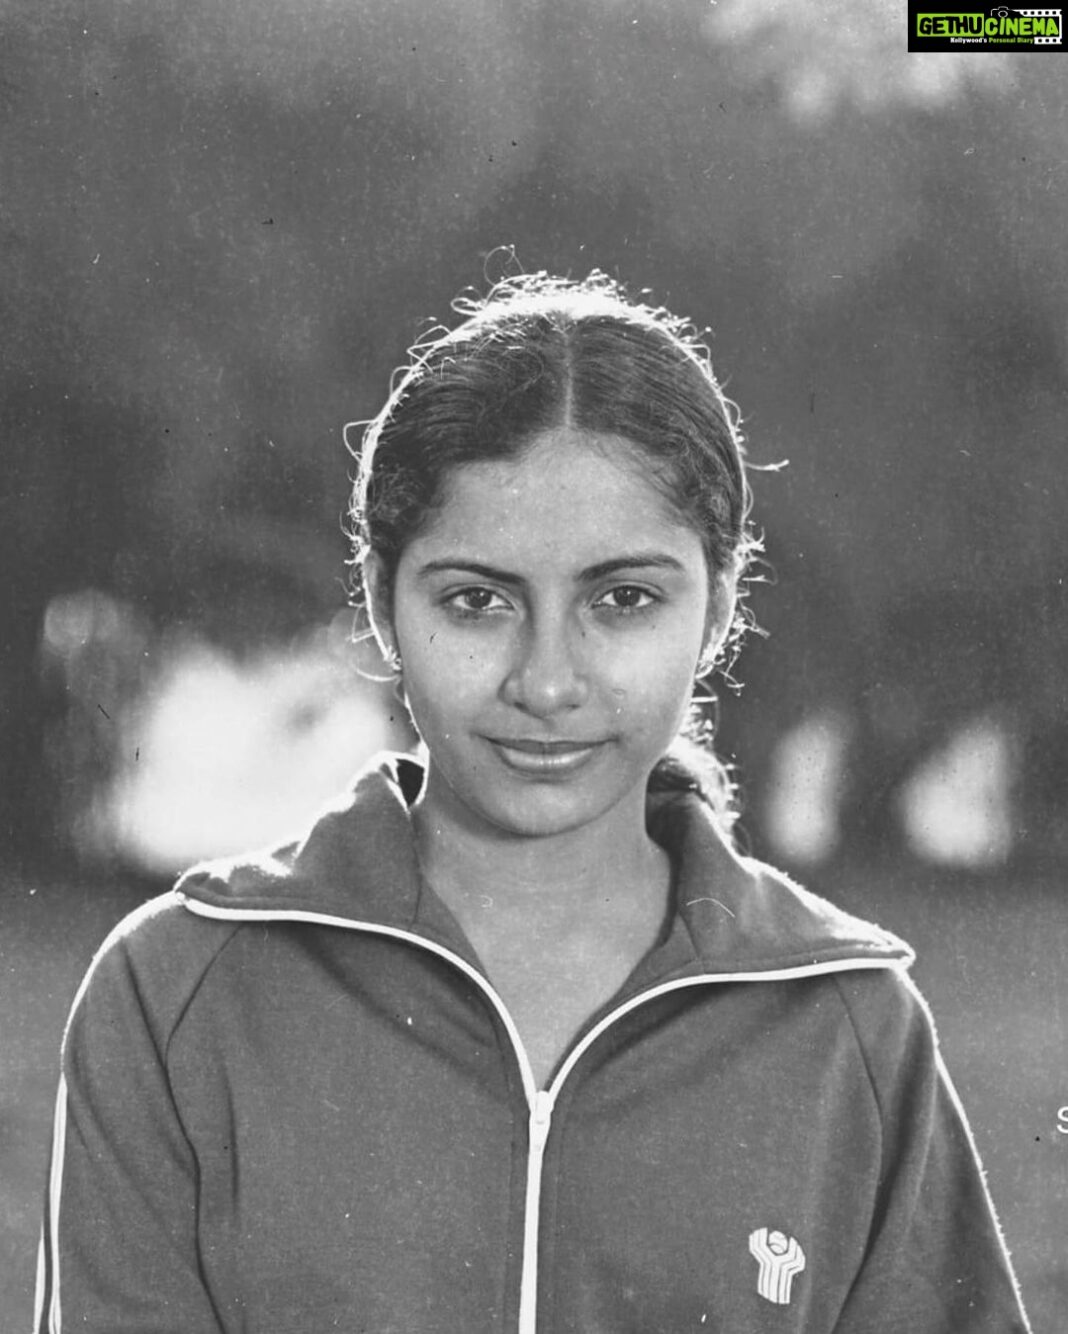 Suhasini Maniratnam Instagram - 41 years ago. Director Mahendran believed I could be his viji. I owe him my 41 year old career. Thanks to my guru Ashok Kumar and my father charuhasan who convinced a very reluctant me to say yes to playing the lead in nenjathai killaathey. Dec 12 is a special day for me